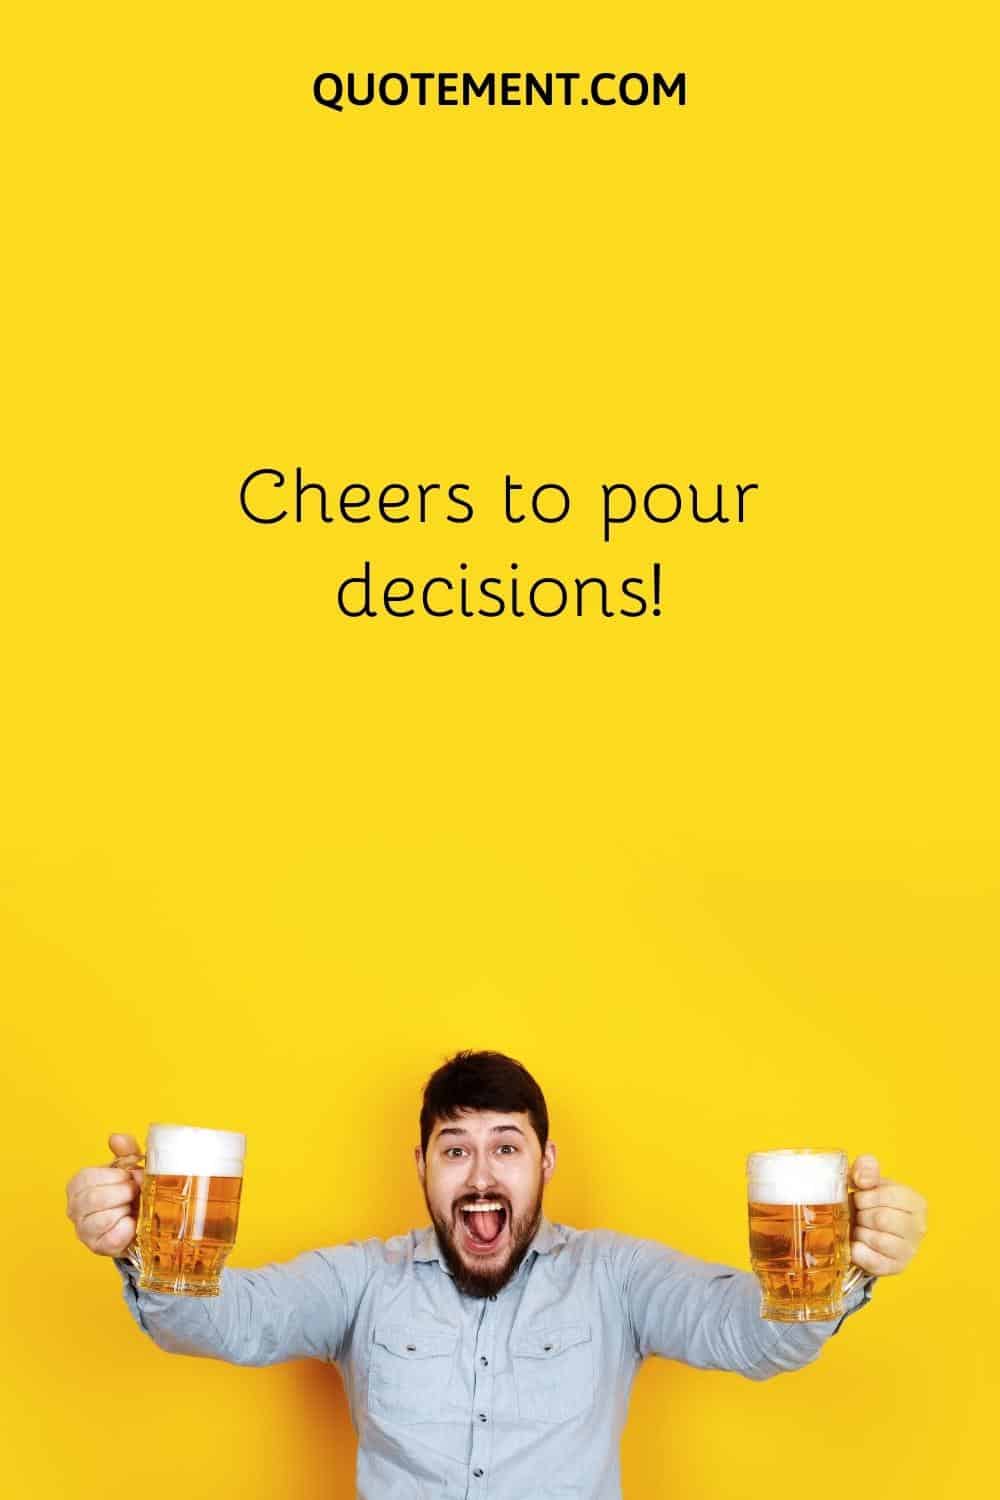 Cheers to pour decisions!